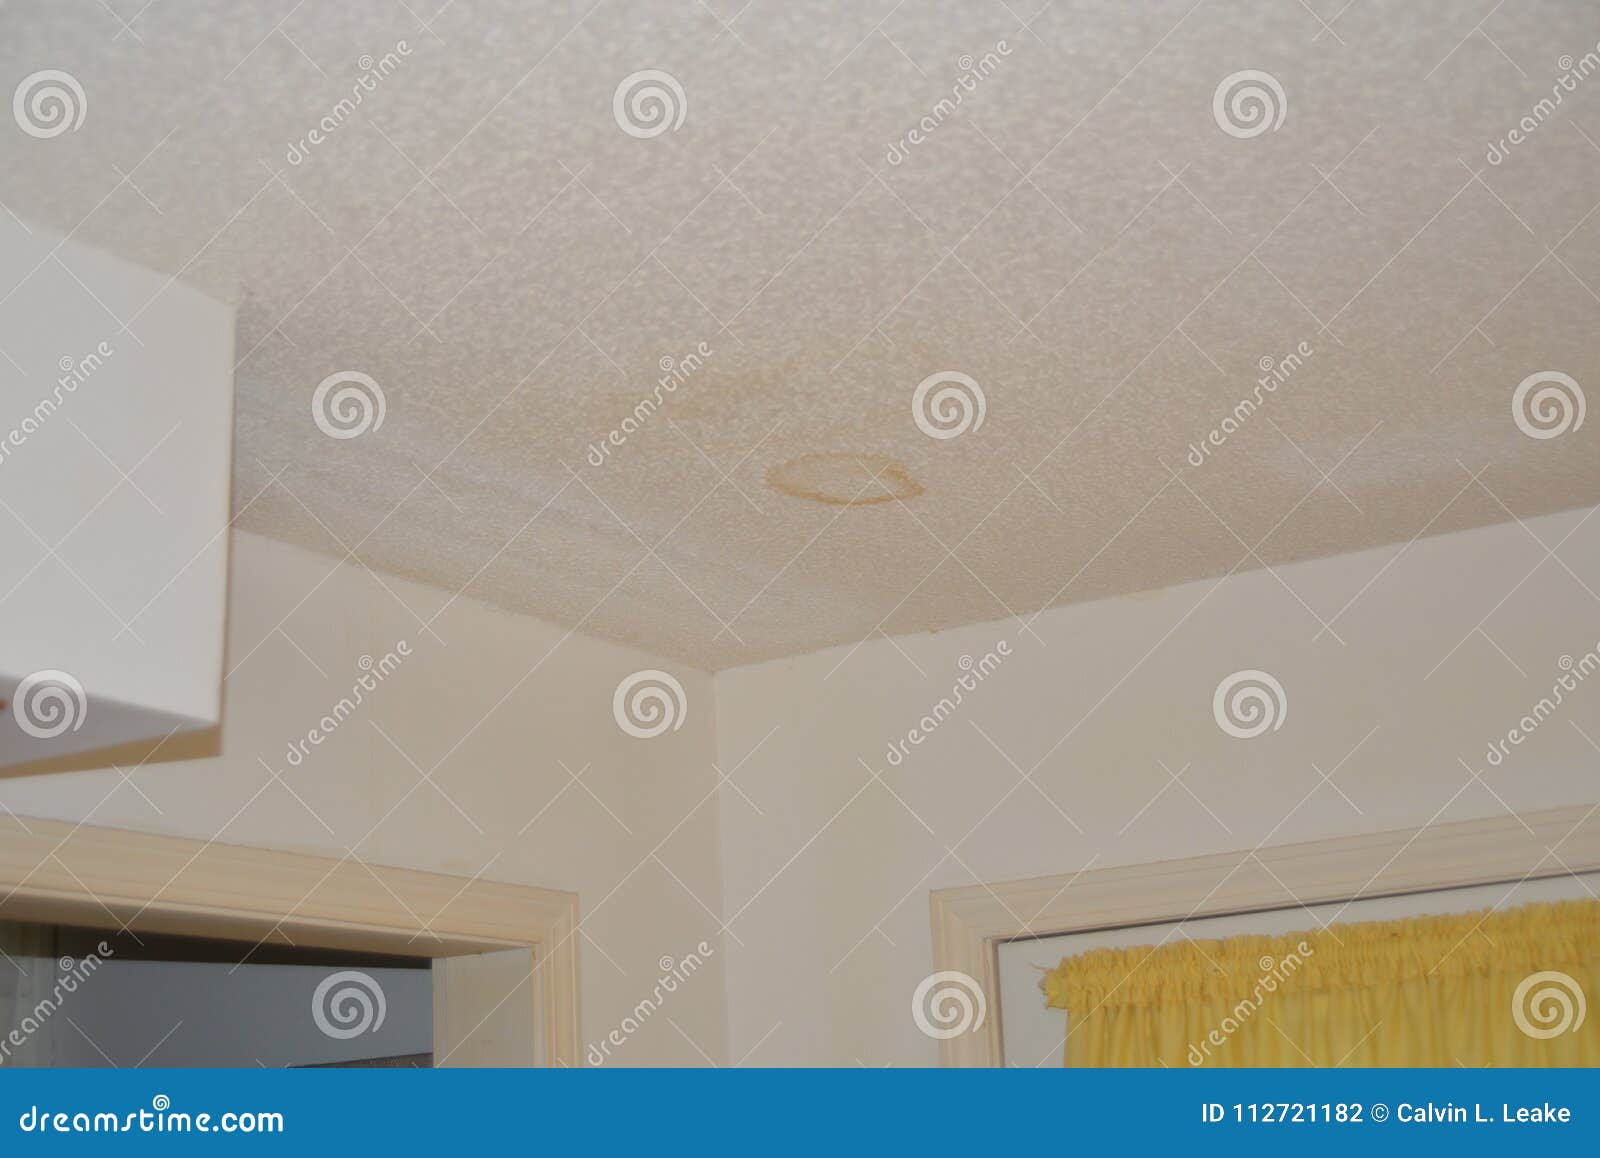 Ceiling With Water Damage Stain Stock Photo Image Of Levee